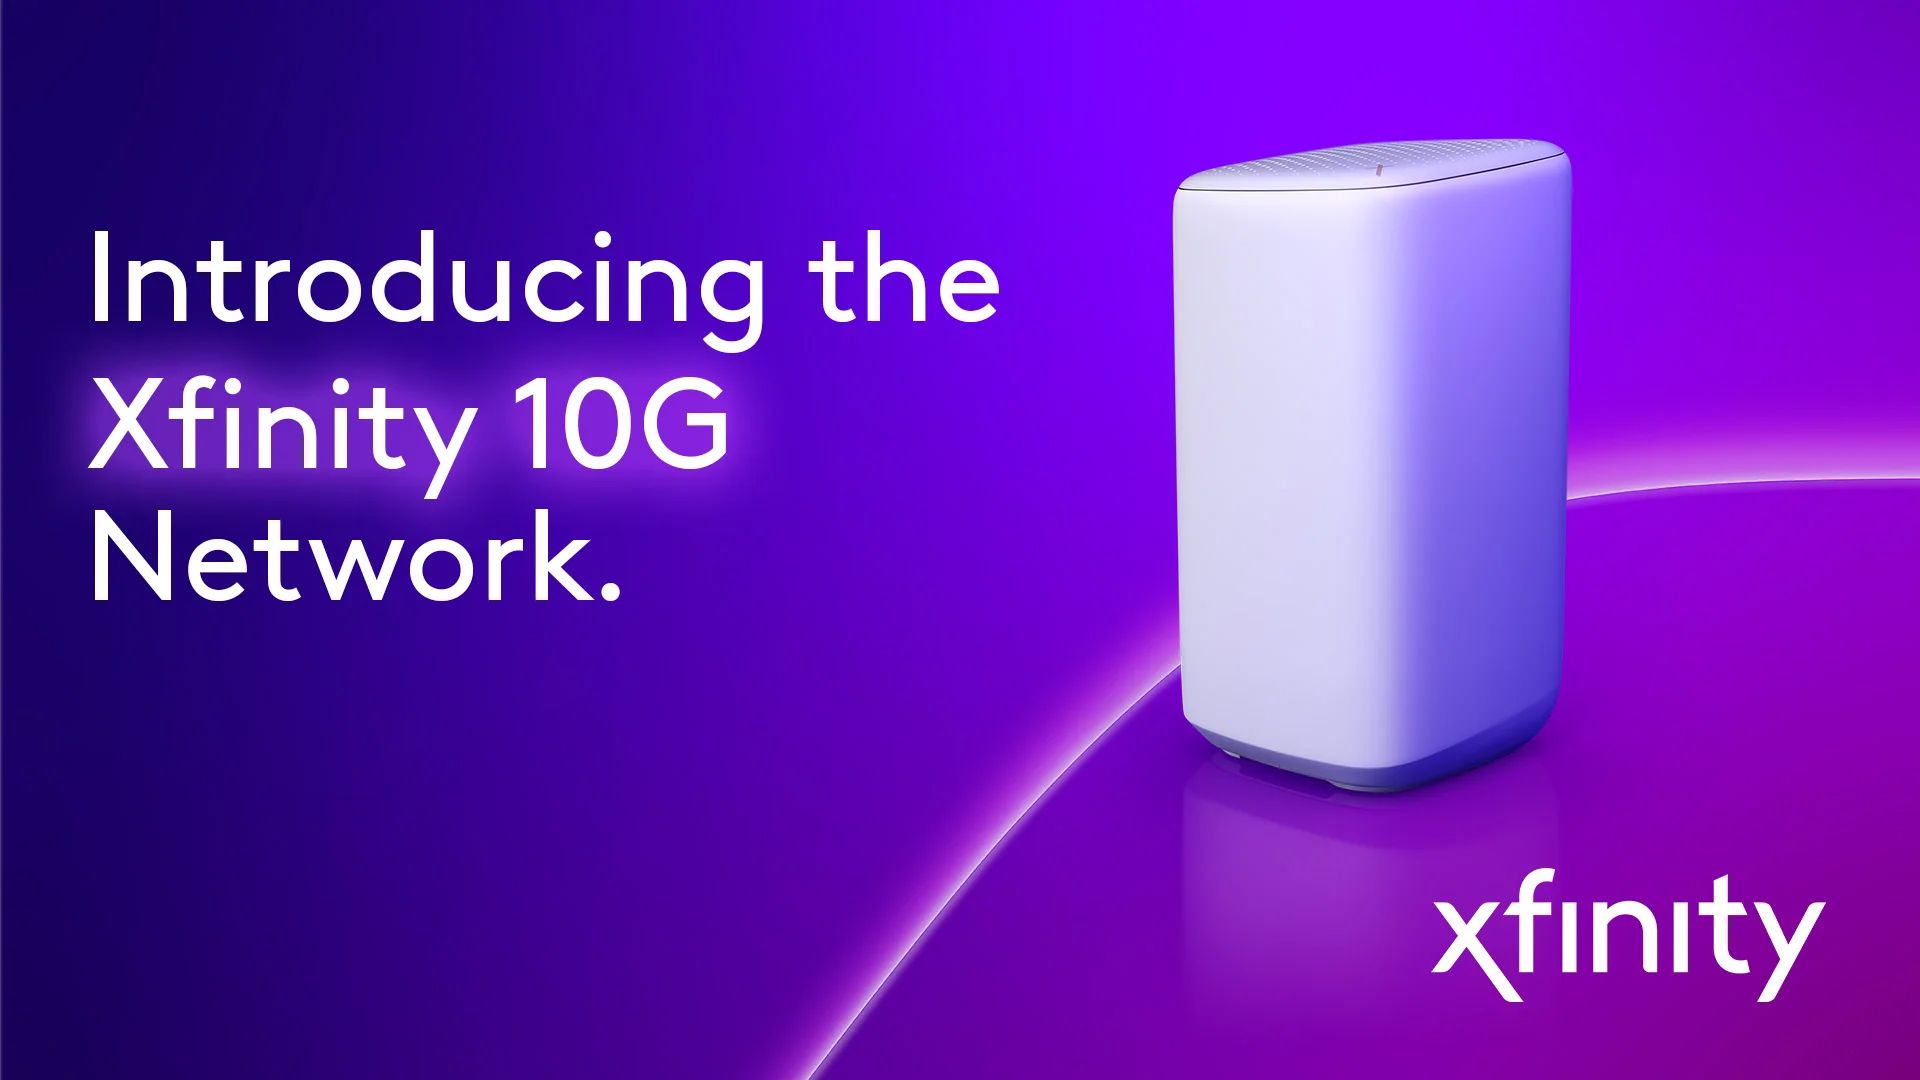 A promotional image for Xfinity 10G.